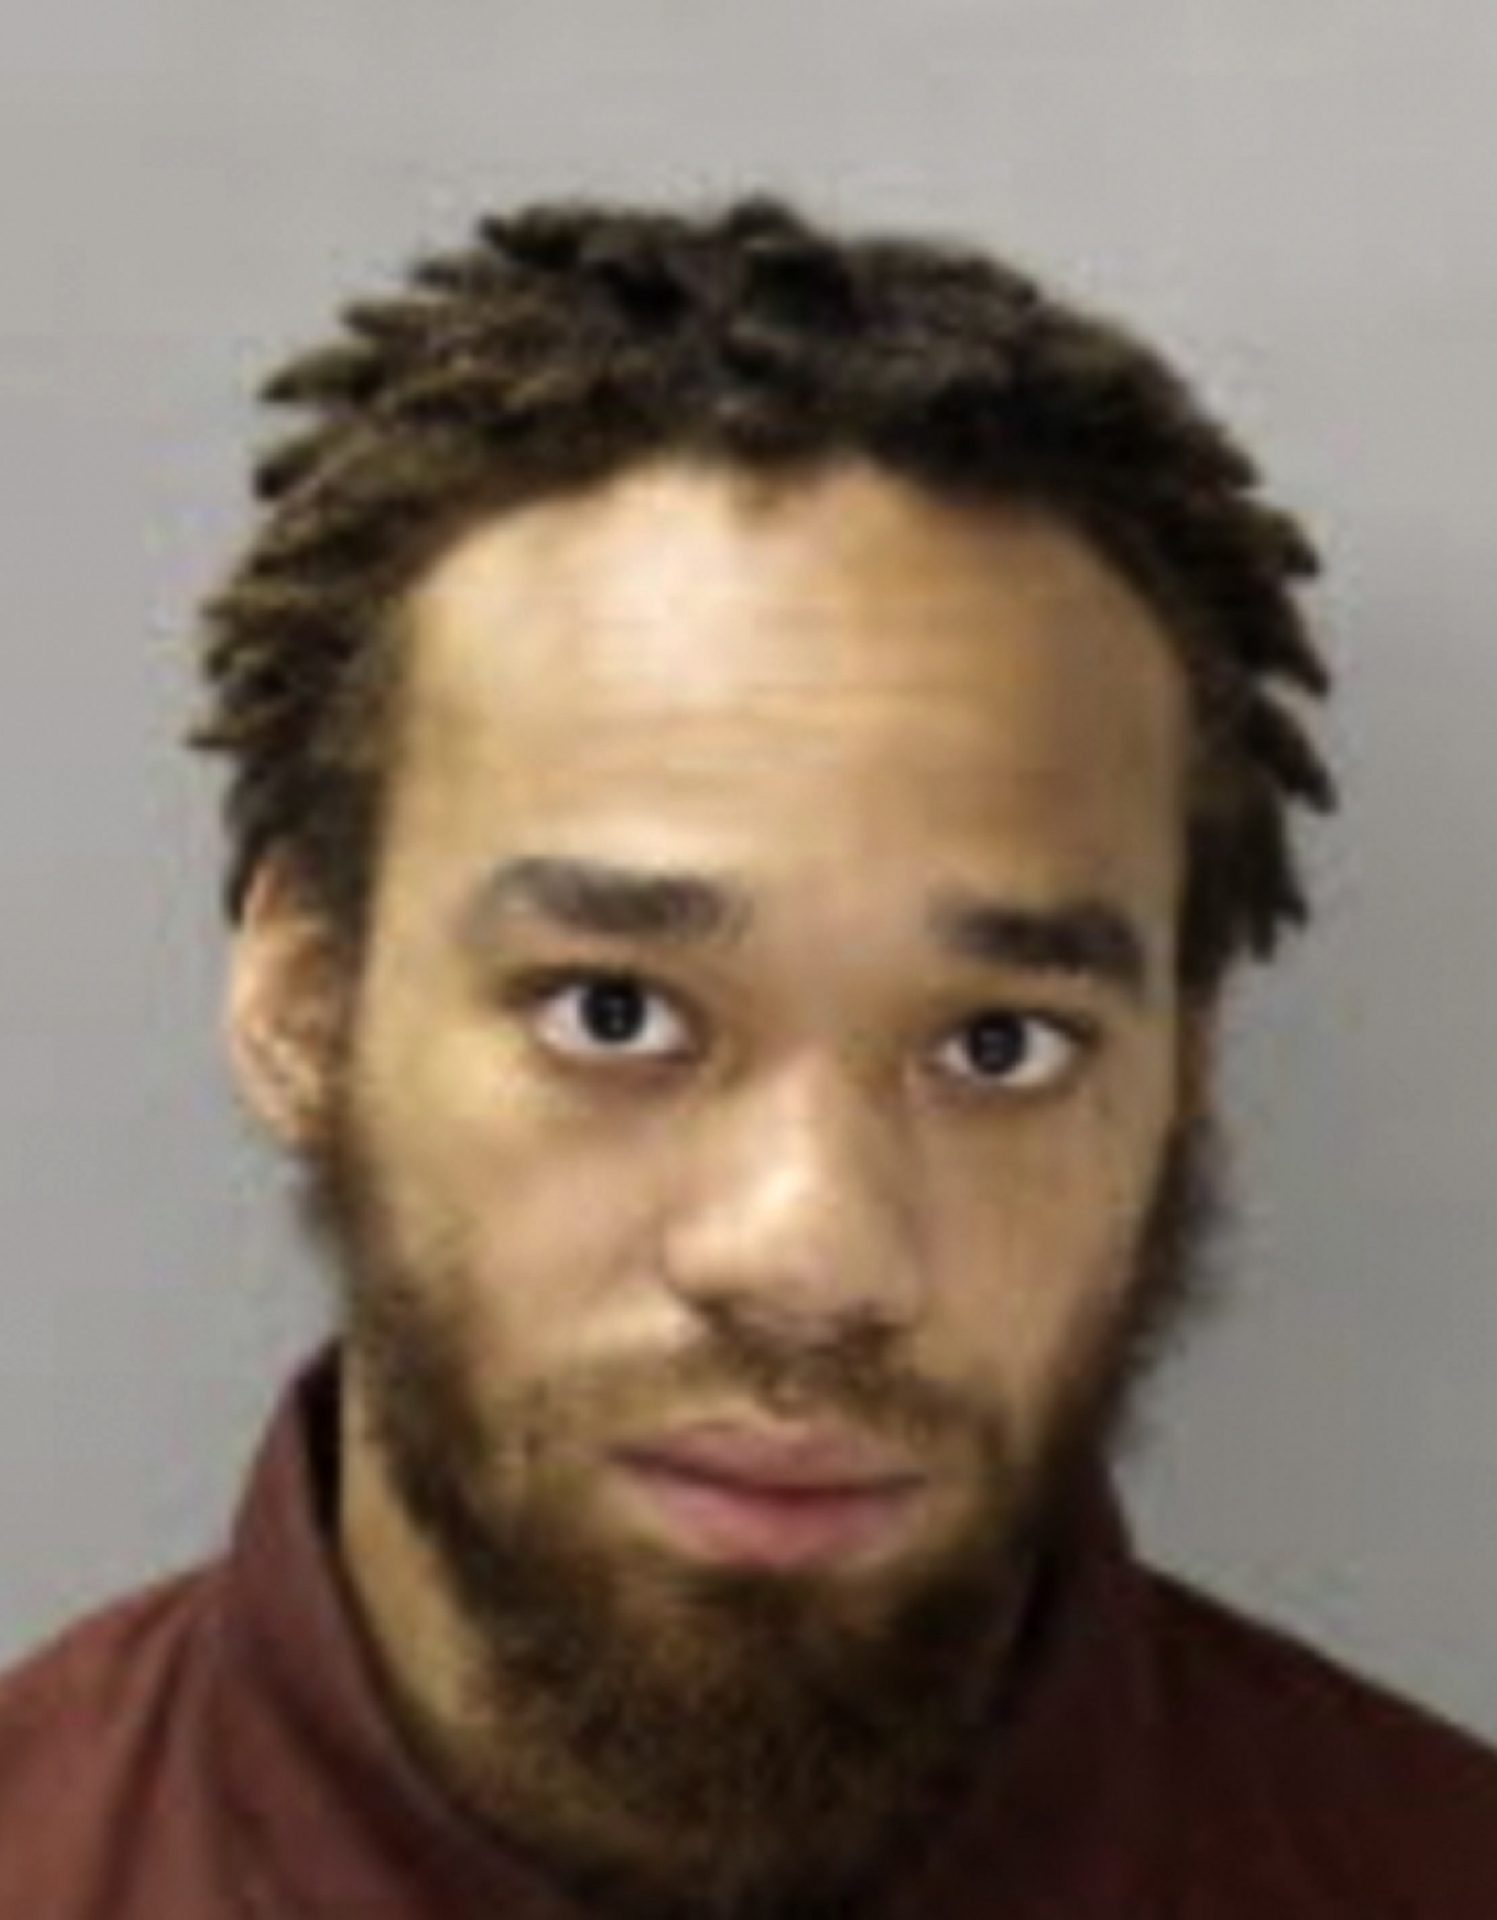 This undated photo from the Pennsylvania Department of Corrections shows inmate Tyrone Briggs. The Pennsylvania Department of Corrections has suspended 13 employees while authorities investigate Briggs' death. A Saturday, Nov. 16, 2019, release says Briggs died “following an inmate-on-inmate assault” on Nov. 11 at the State Correctional Institution at Mahanoy. The release says department secretary John Wetzel on Friday, Nov. 15 suspended the employees without pay during the criminal and administrative investigations.